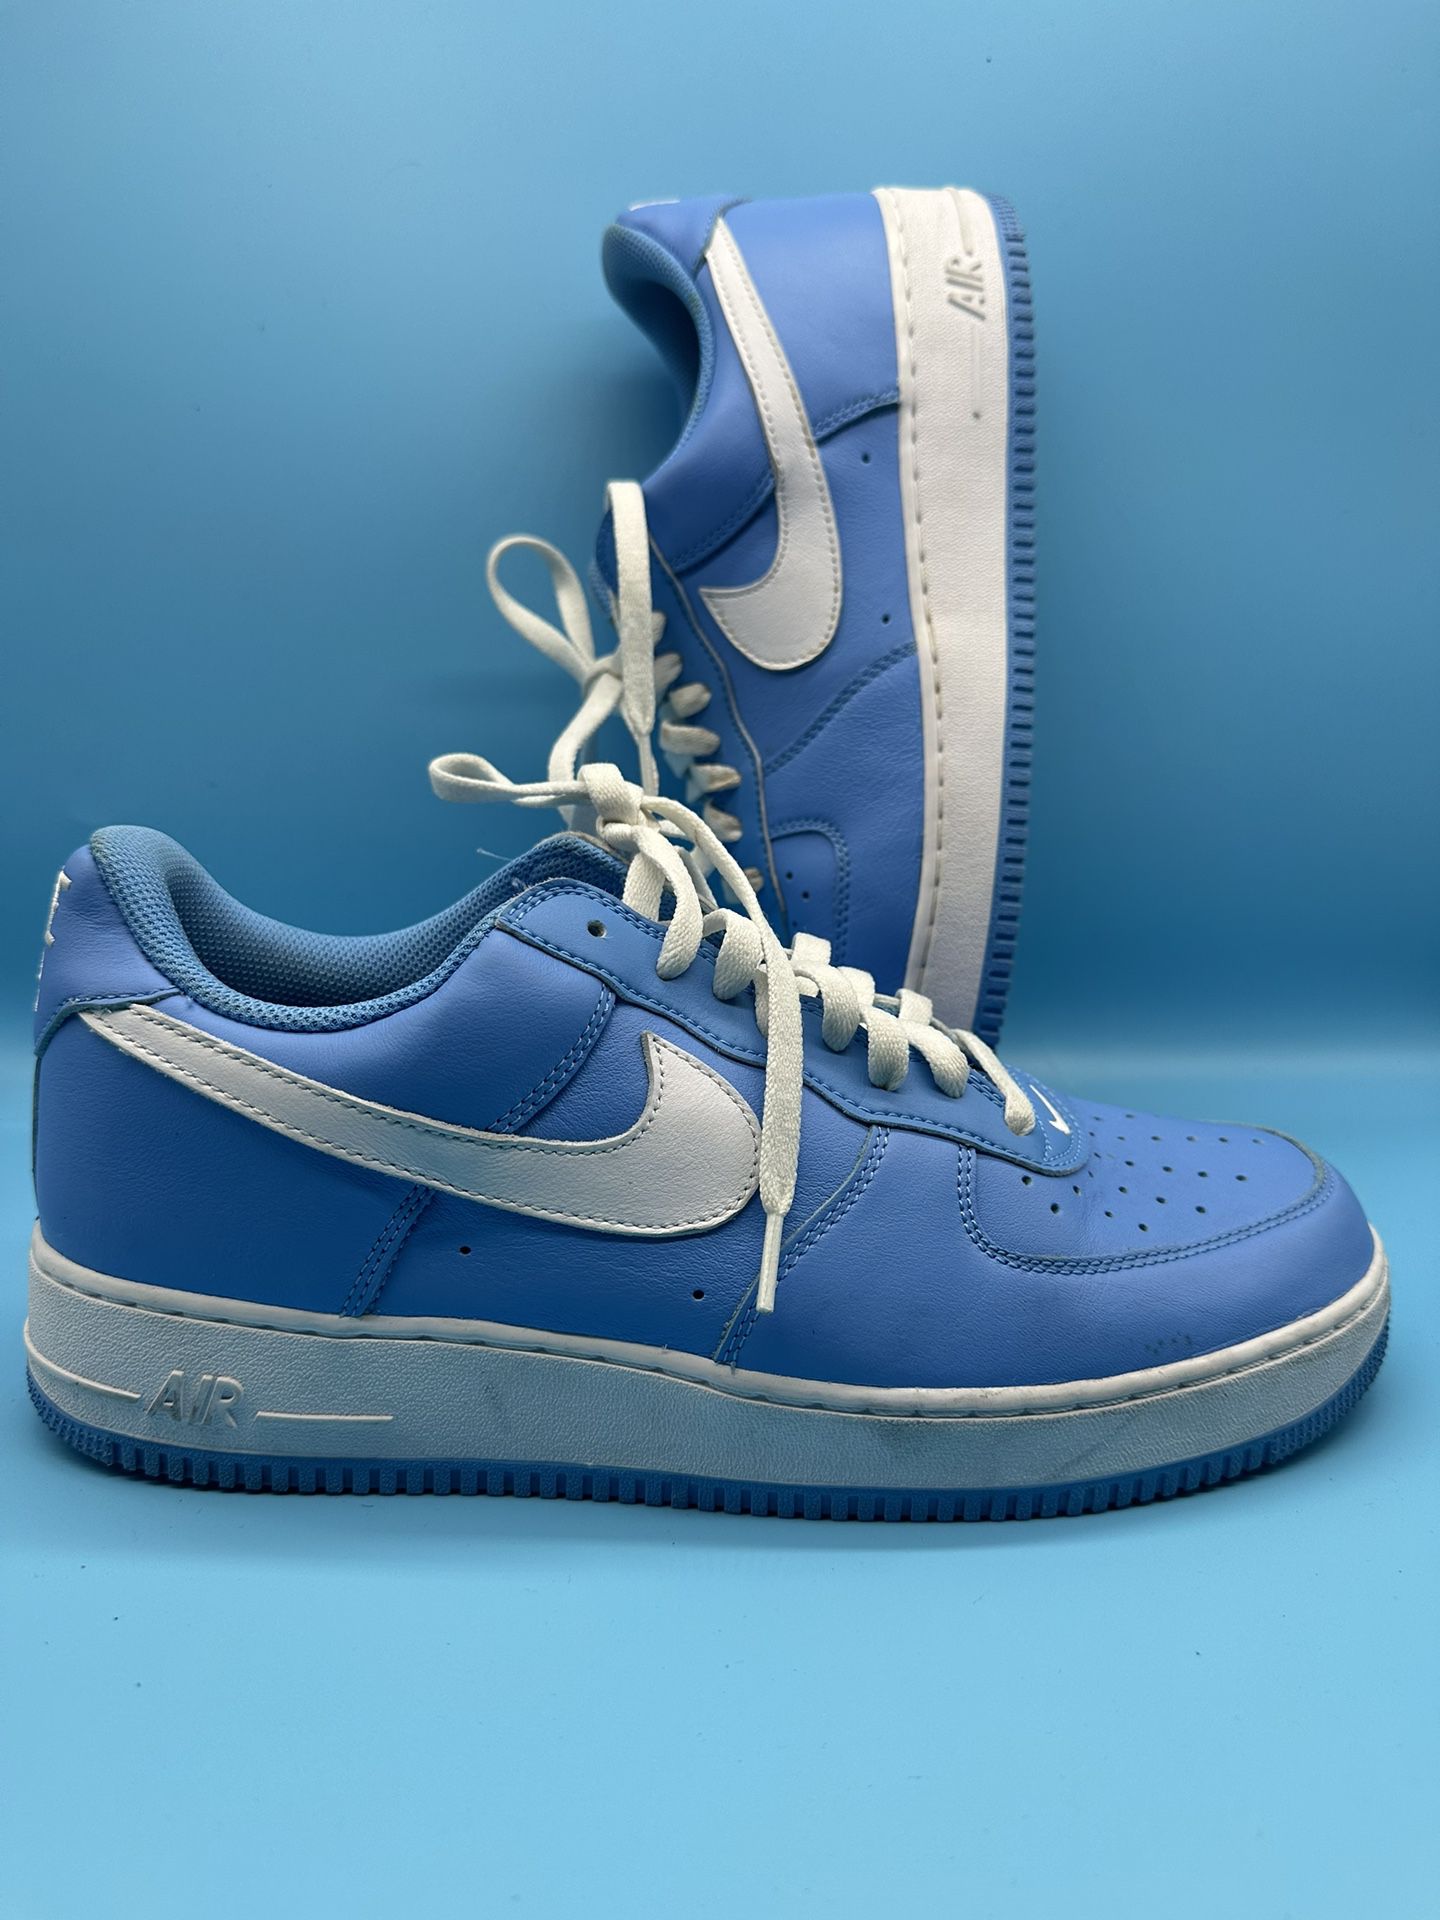 Men's Nike Air Force 1 size 13 Blue